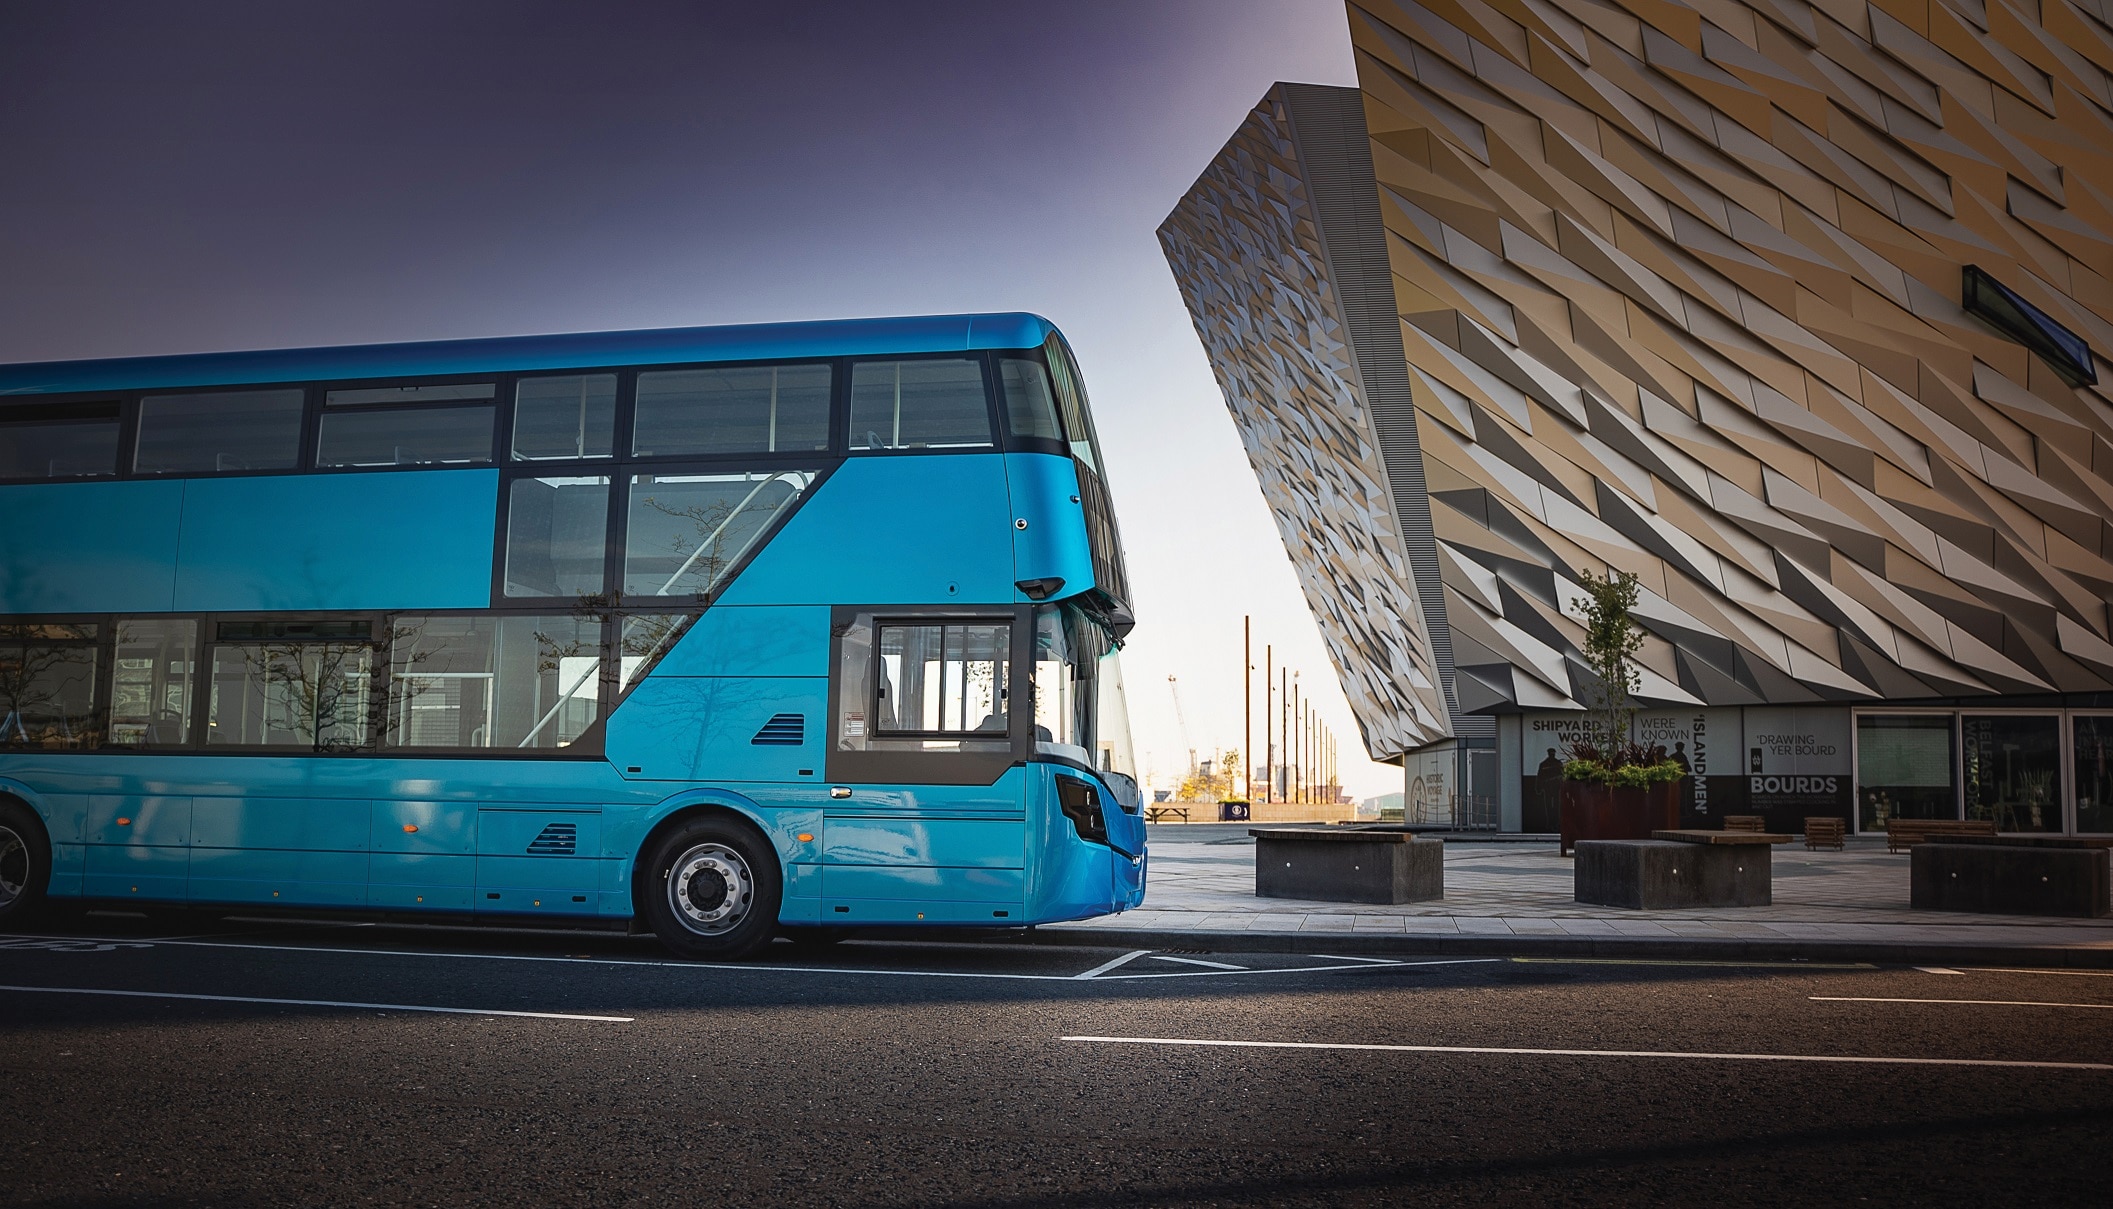 Wrightbus wins Ireland NTA framework contest for up to 800 buses